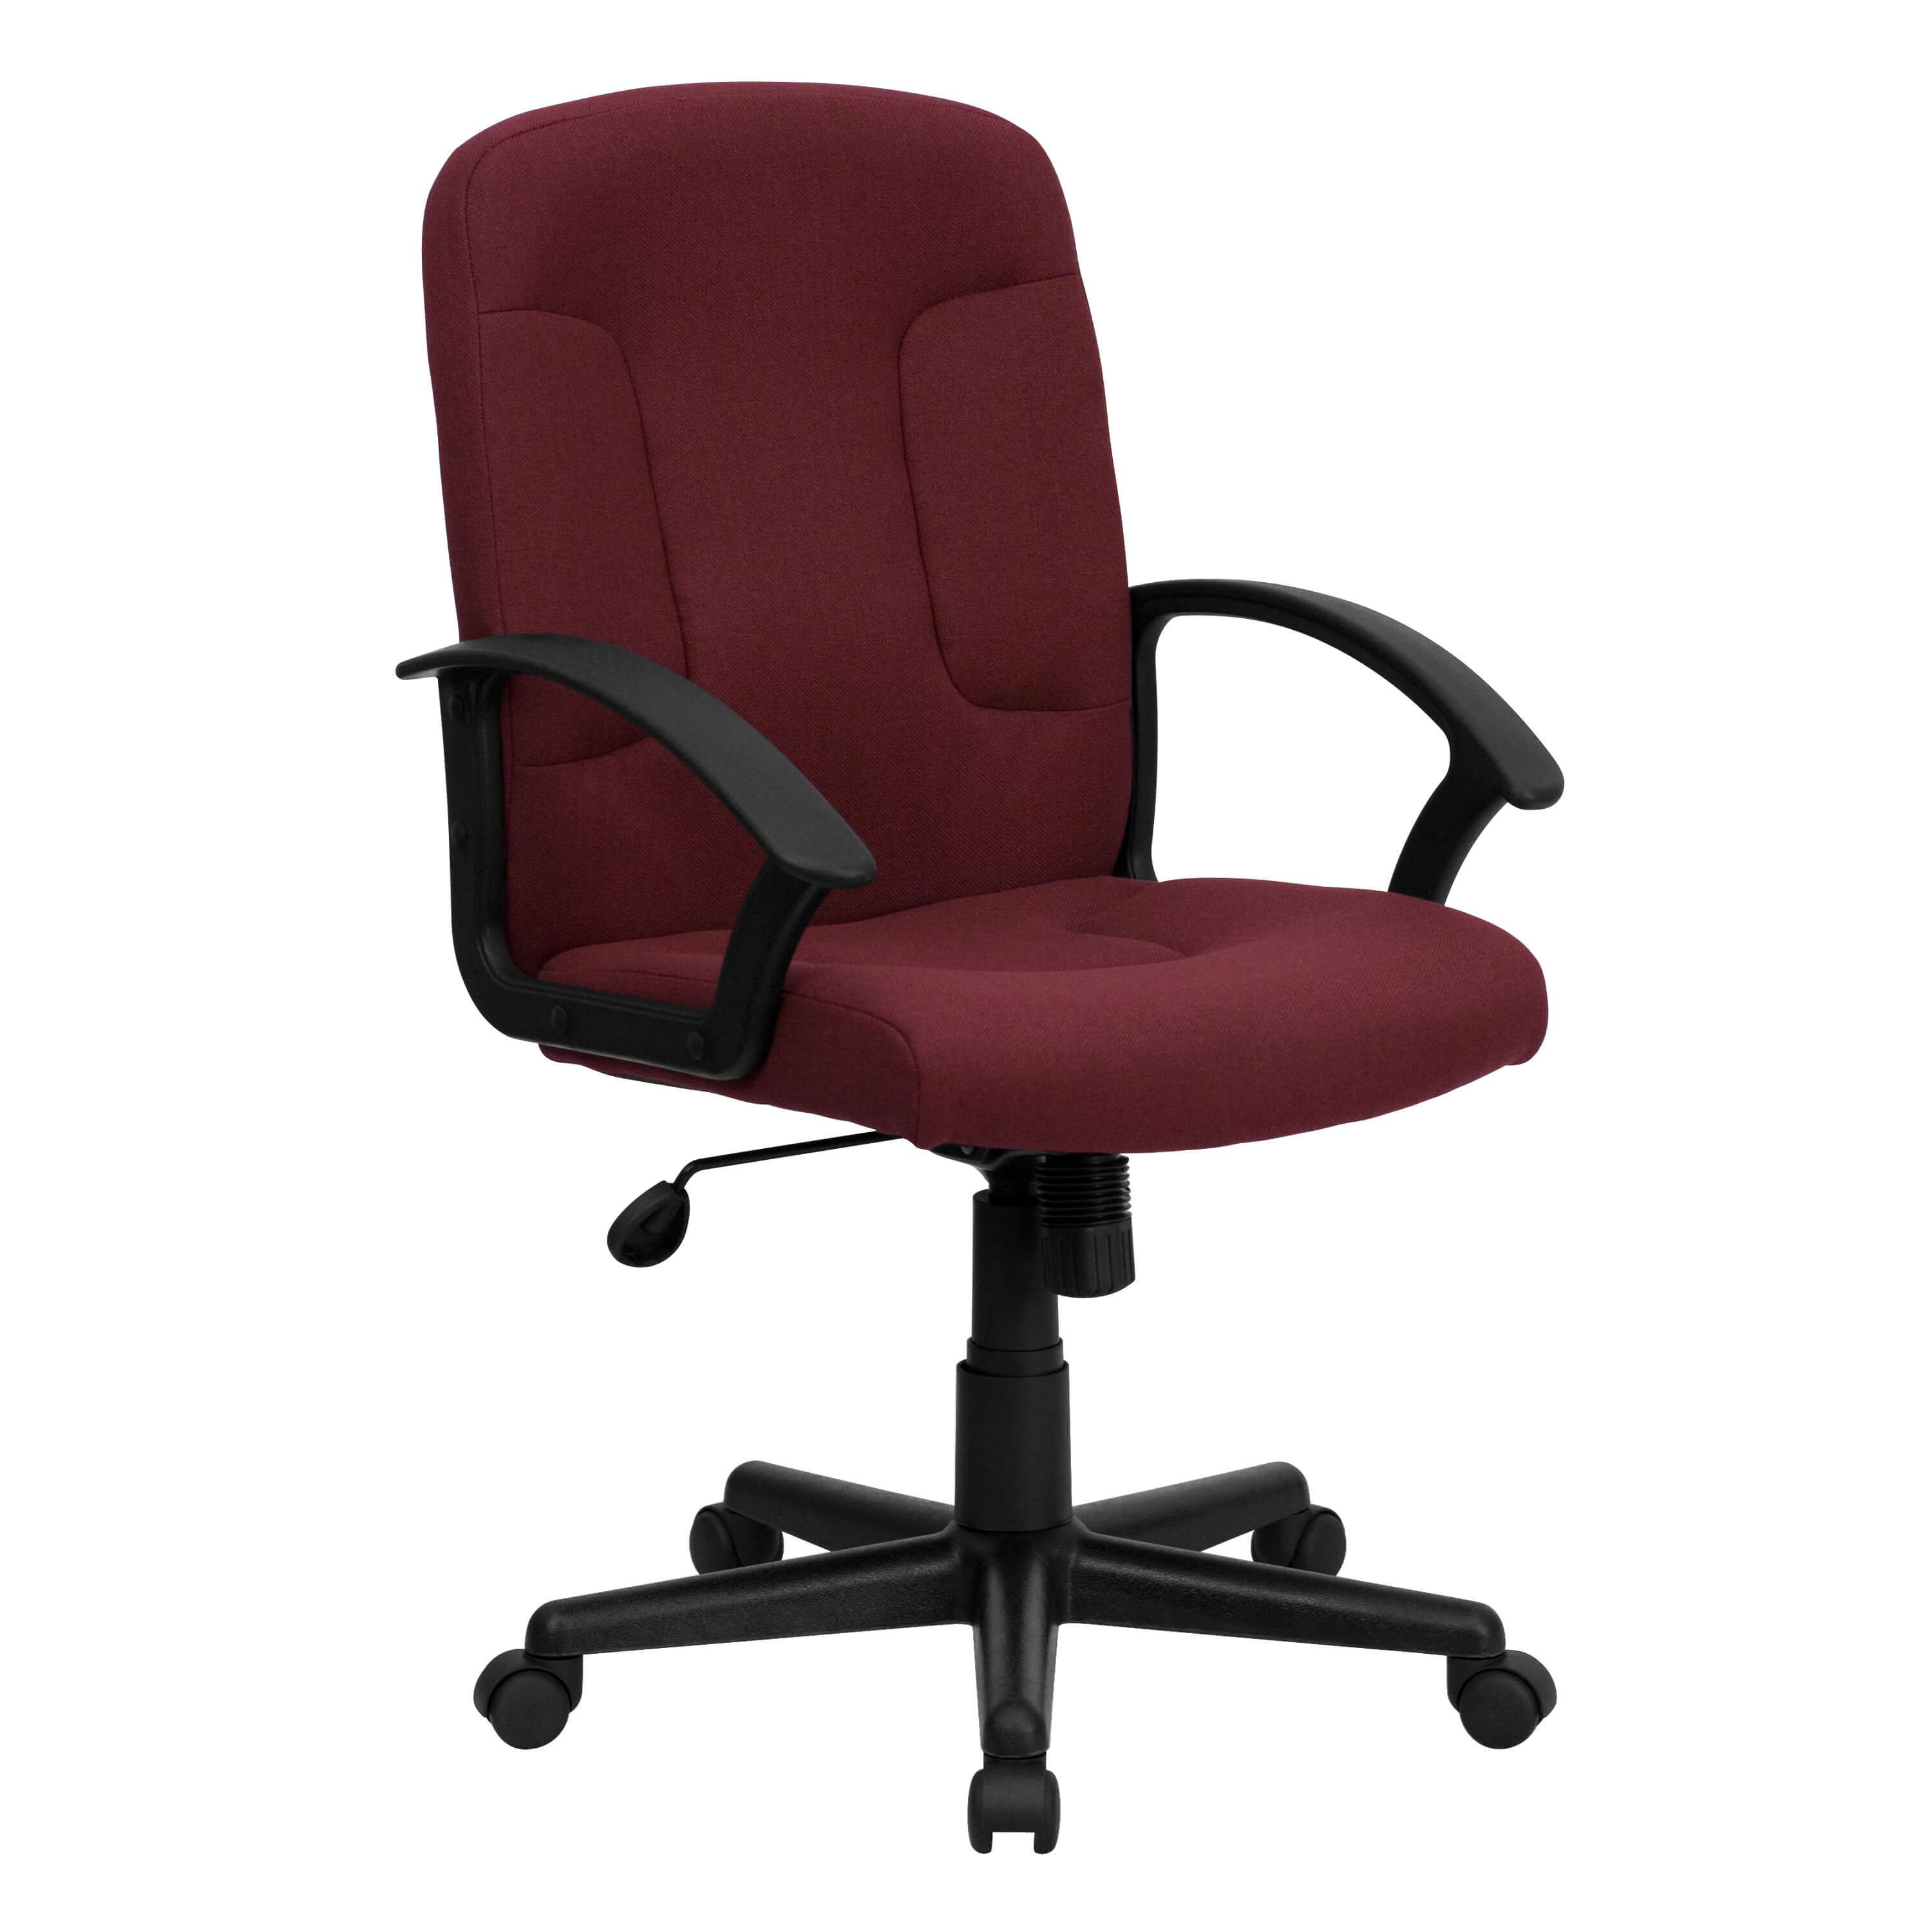 Cool office chairs upholstered desk chair